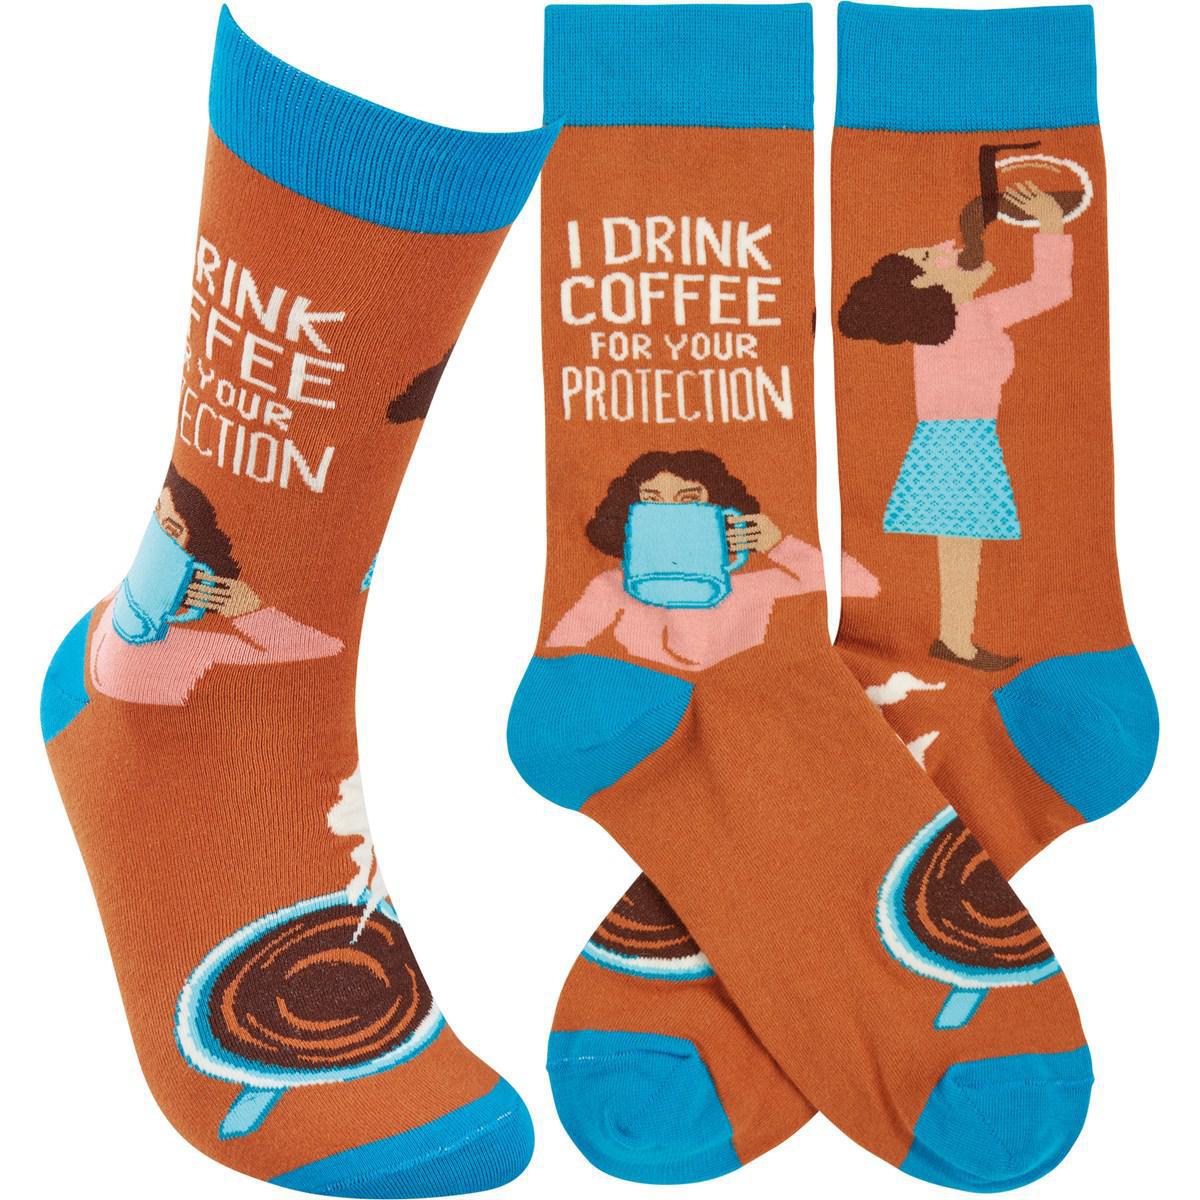 I Drink Coffee For Your Protection Socks